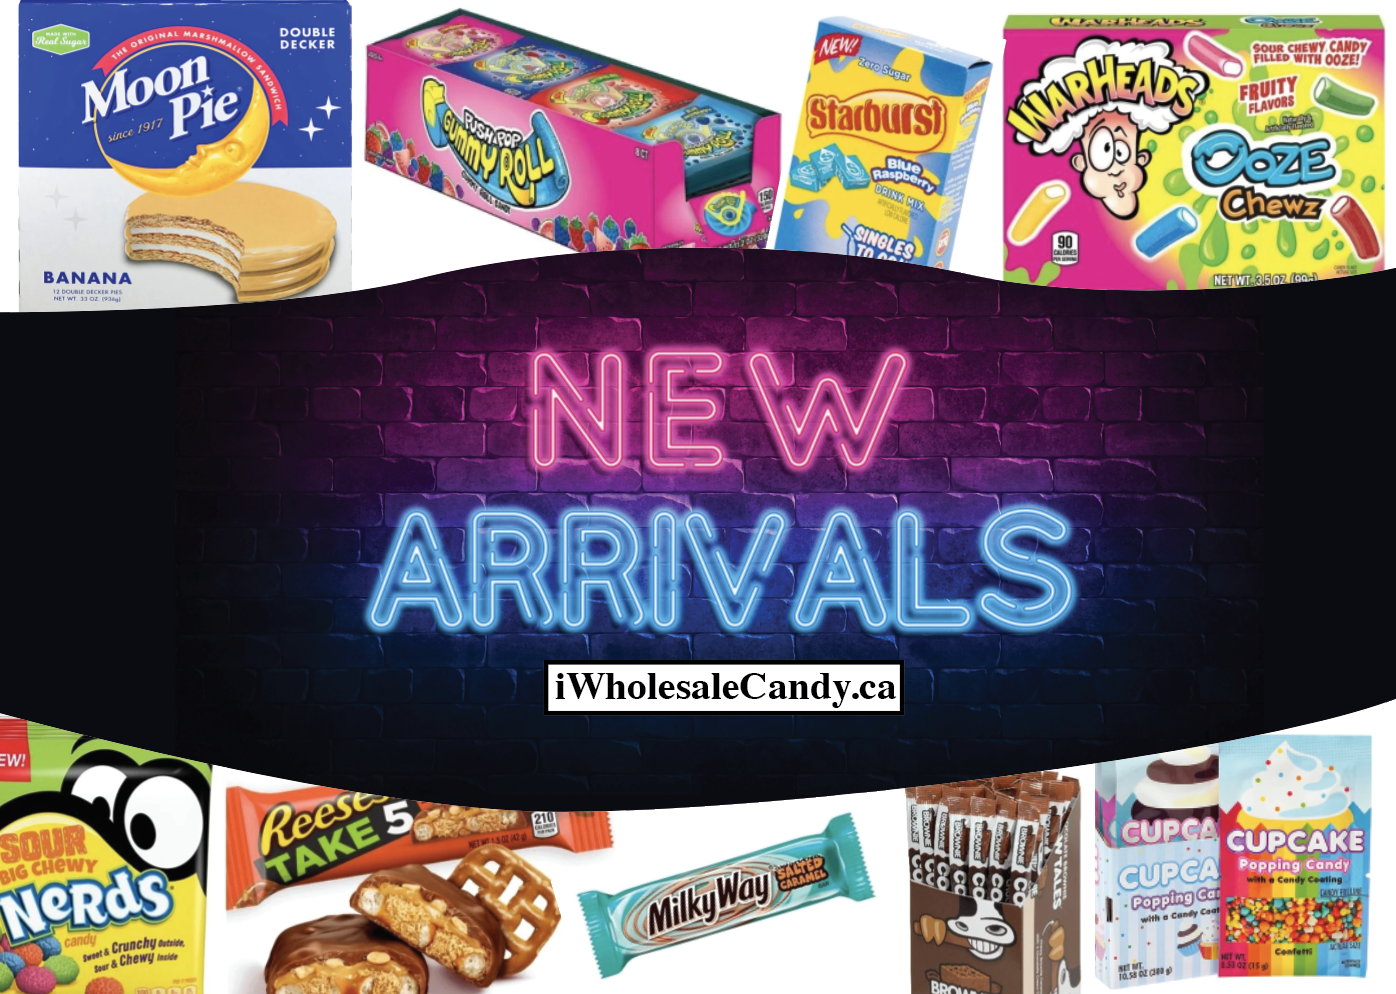 New year arrivals you MUST carry!